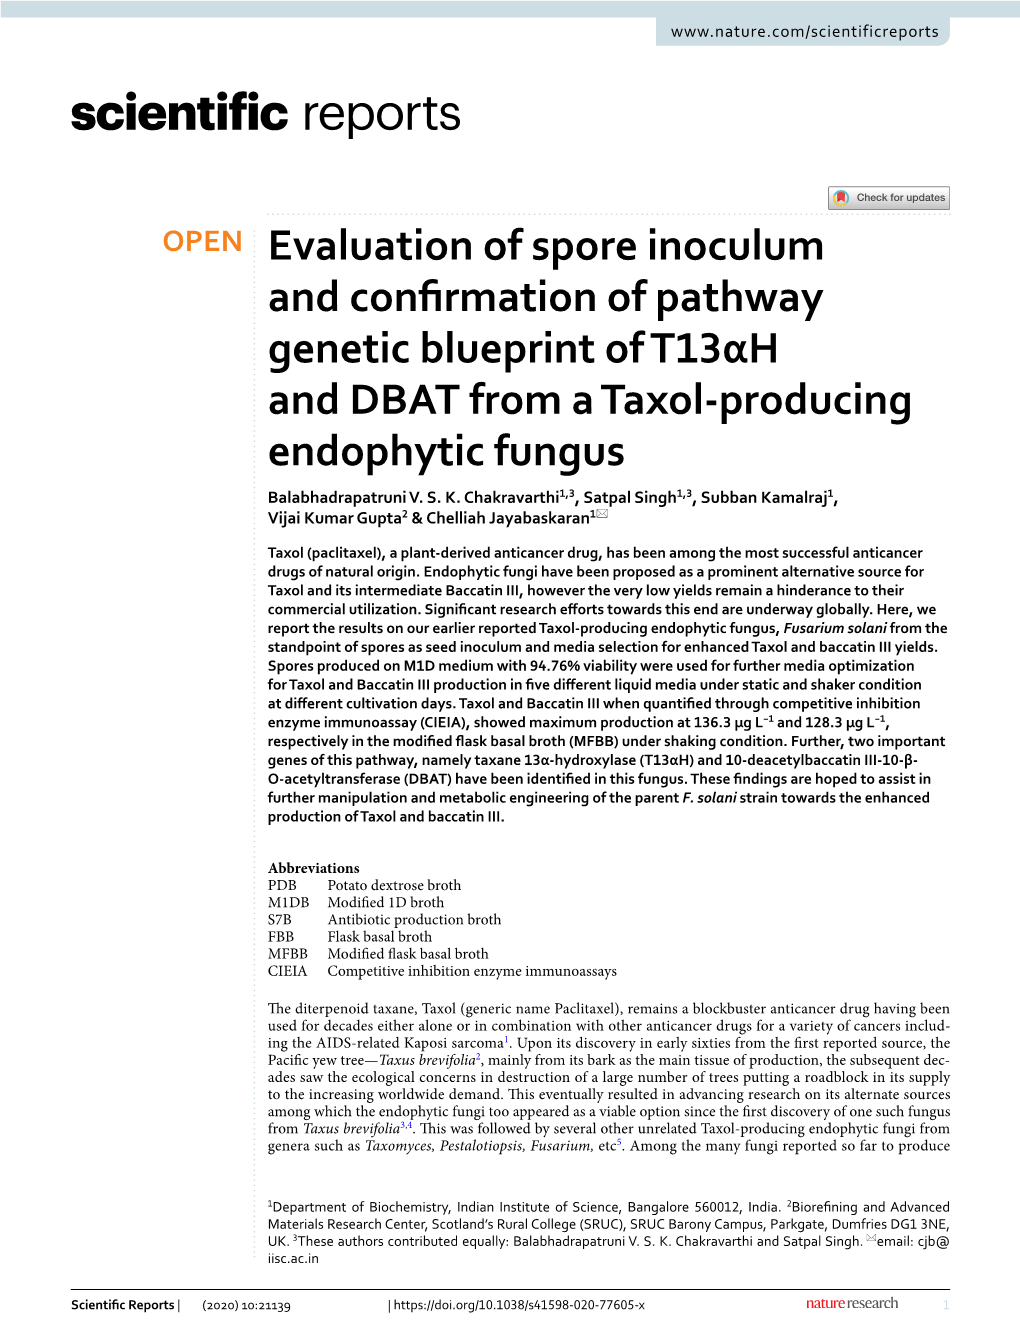 Evaluation of Spore Inoculum and Confirmation of Pathway Genetic